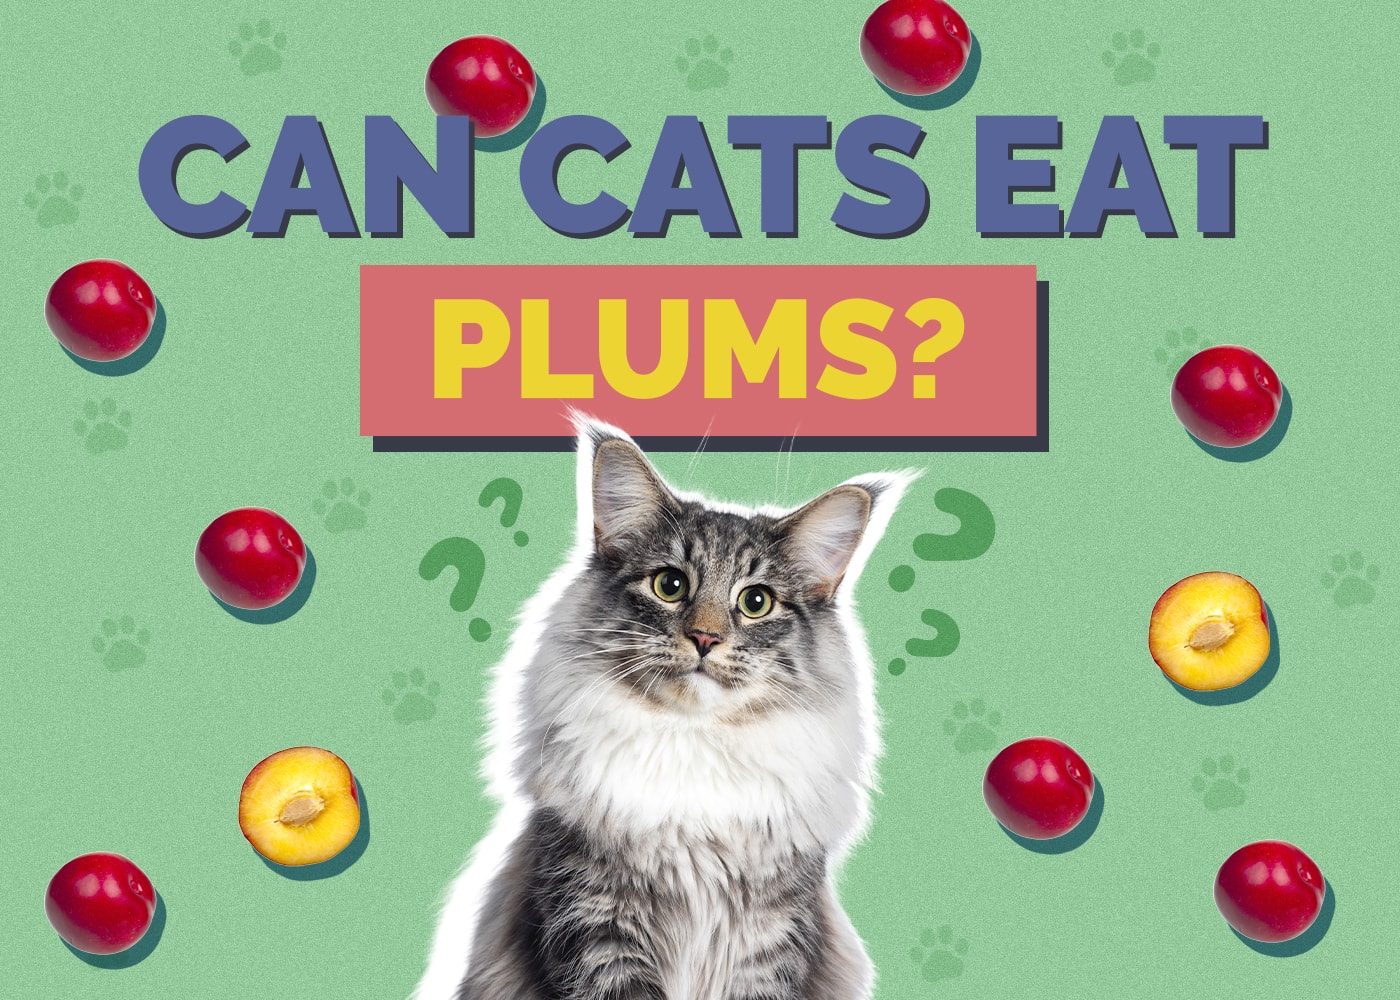 Can Cats Eat plum